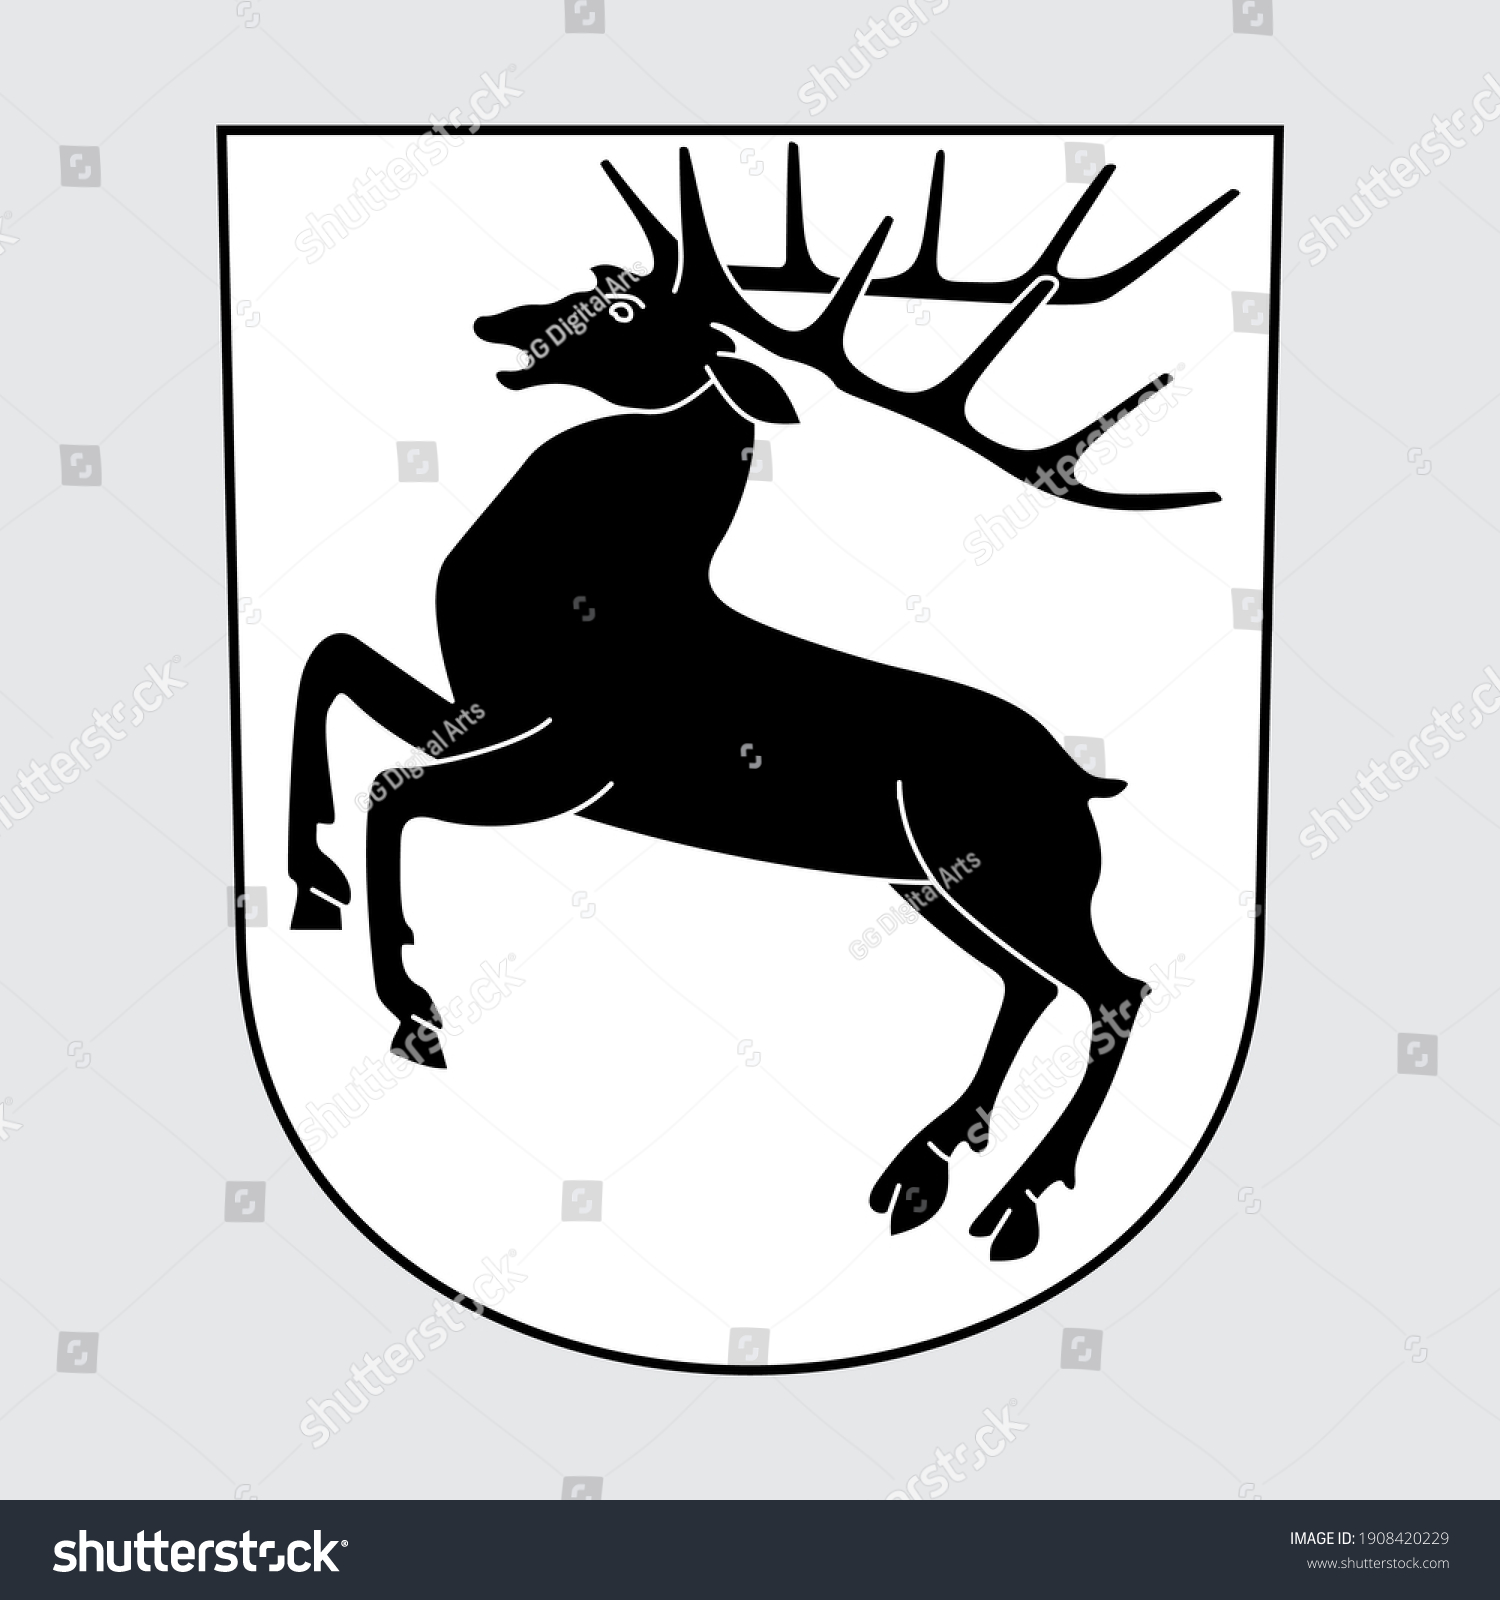 SVG of Vector image of the coat of arms of Hirzel, Zurich, Switzerland, with frame. Black and white illustration of a deer. svg